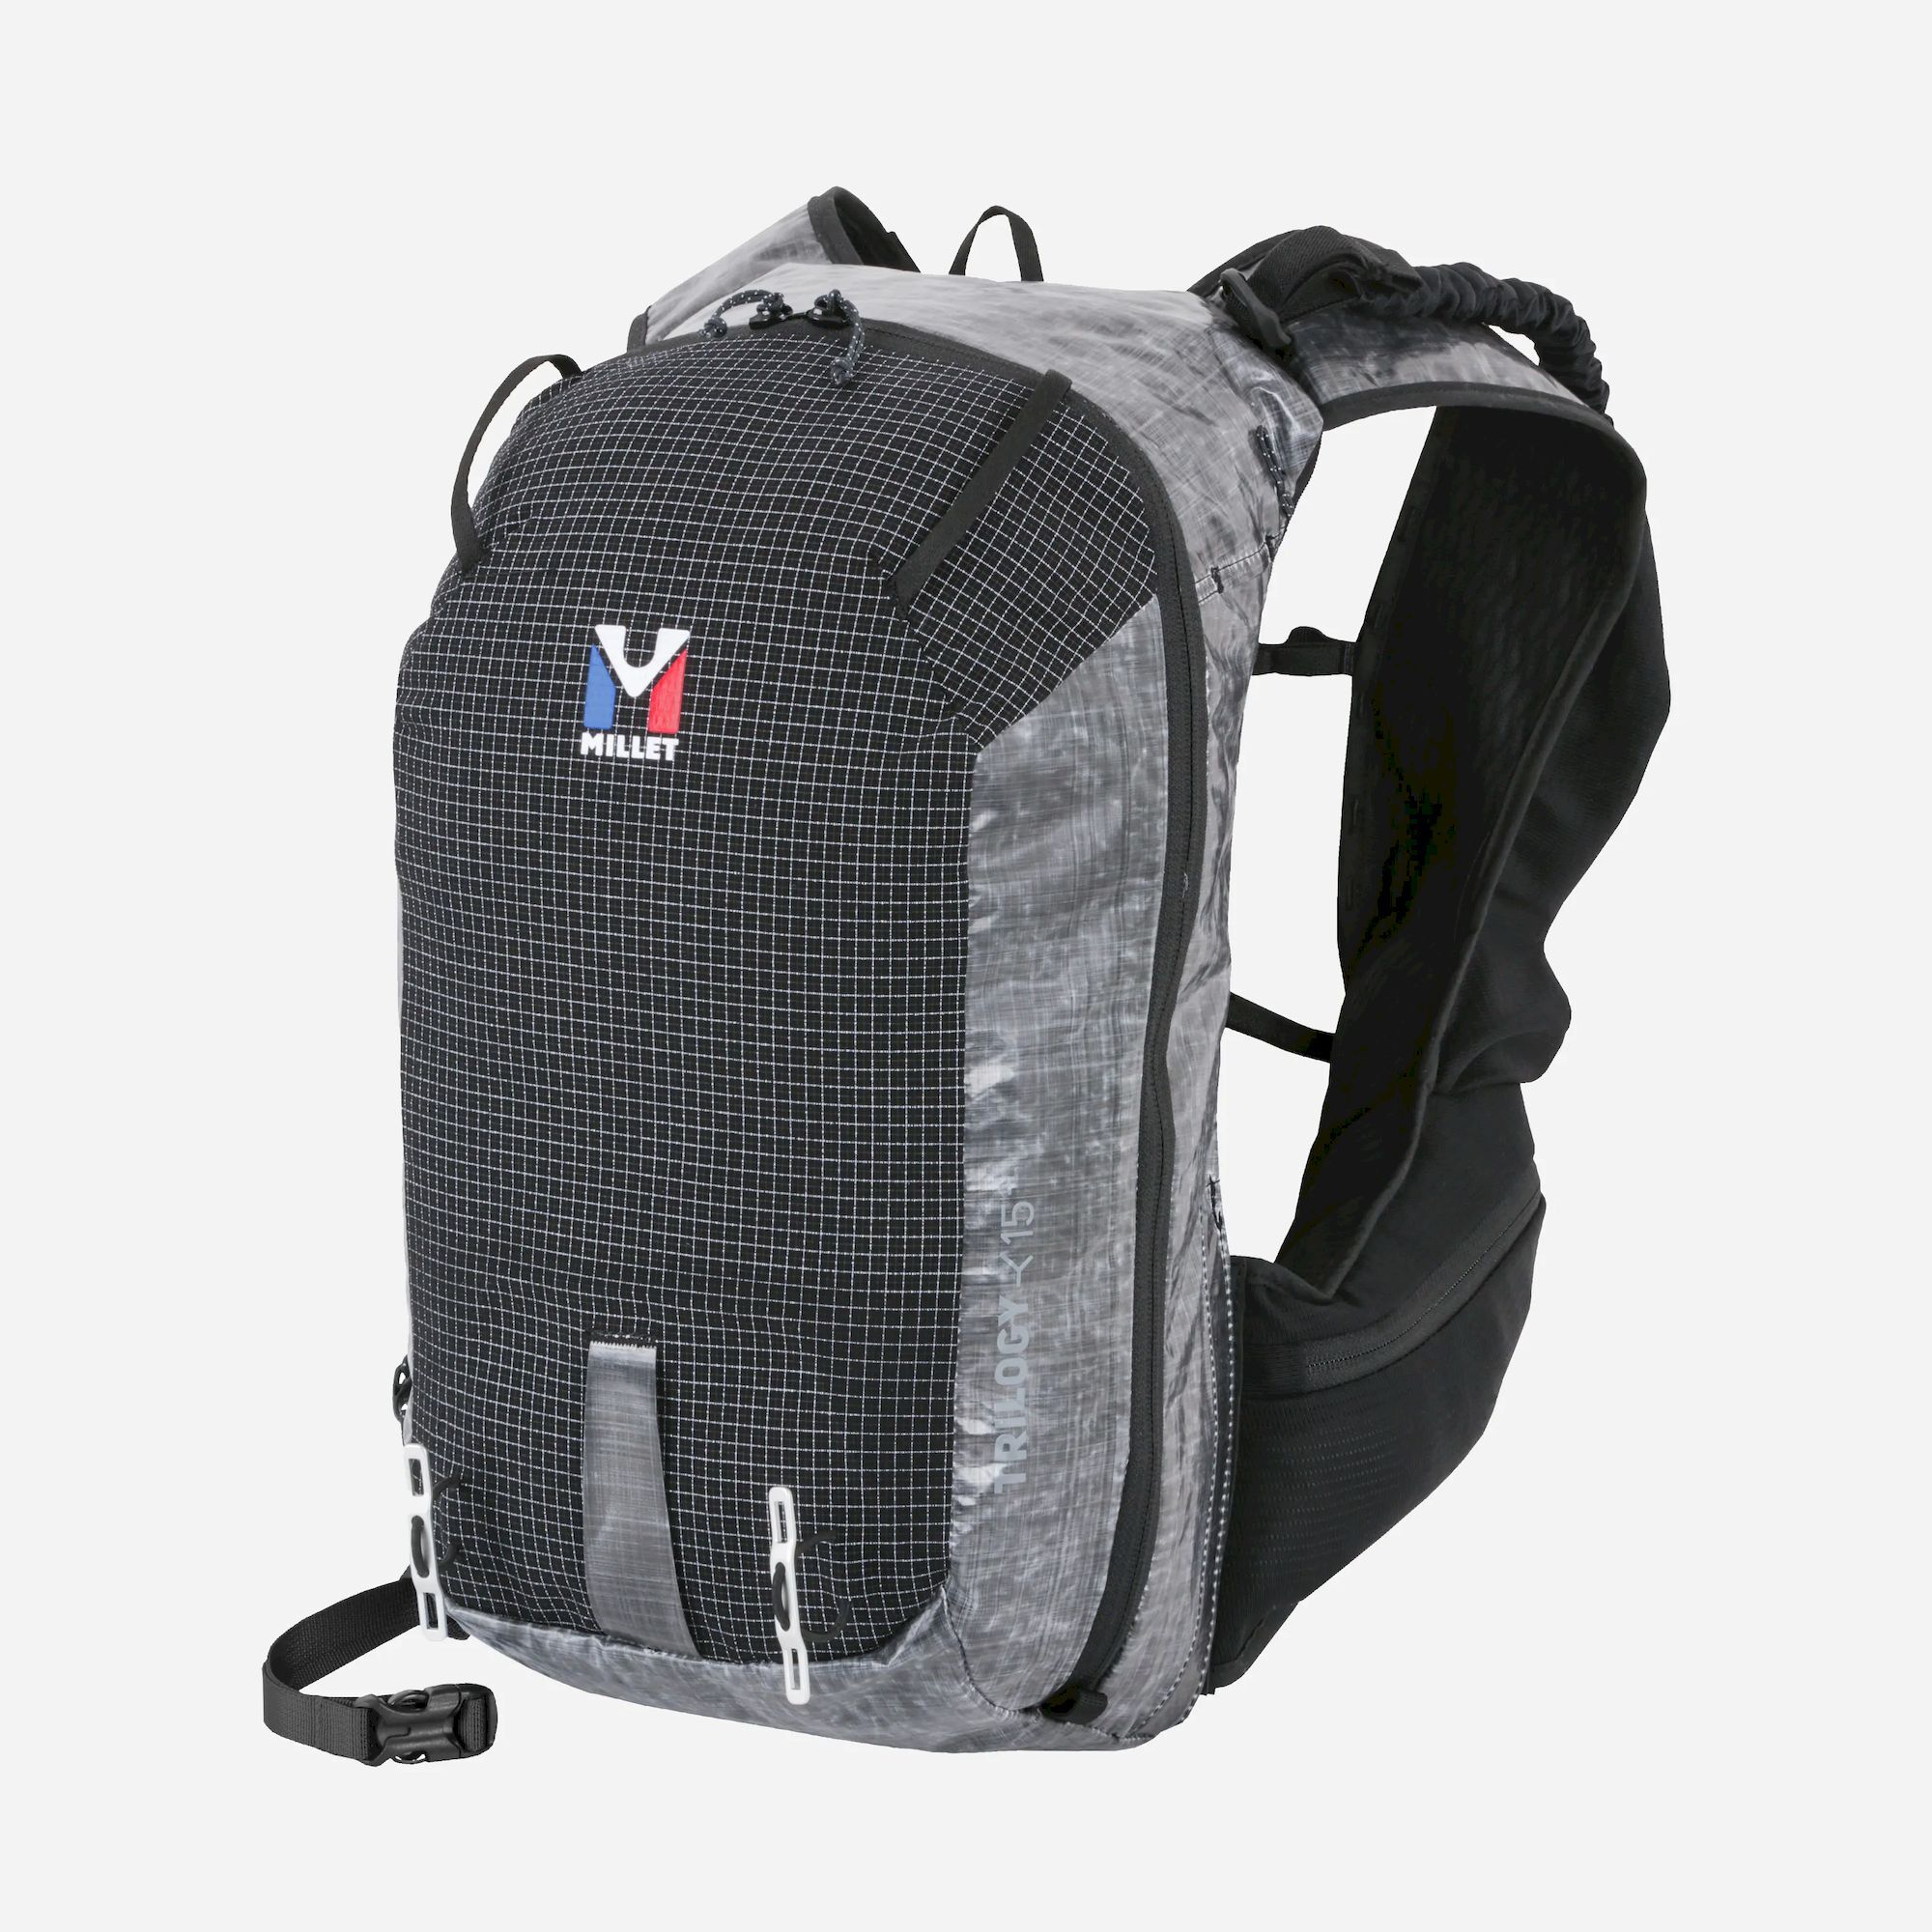 Millet Trilogy 15+ - Mountaineering backpack